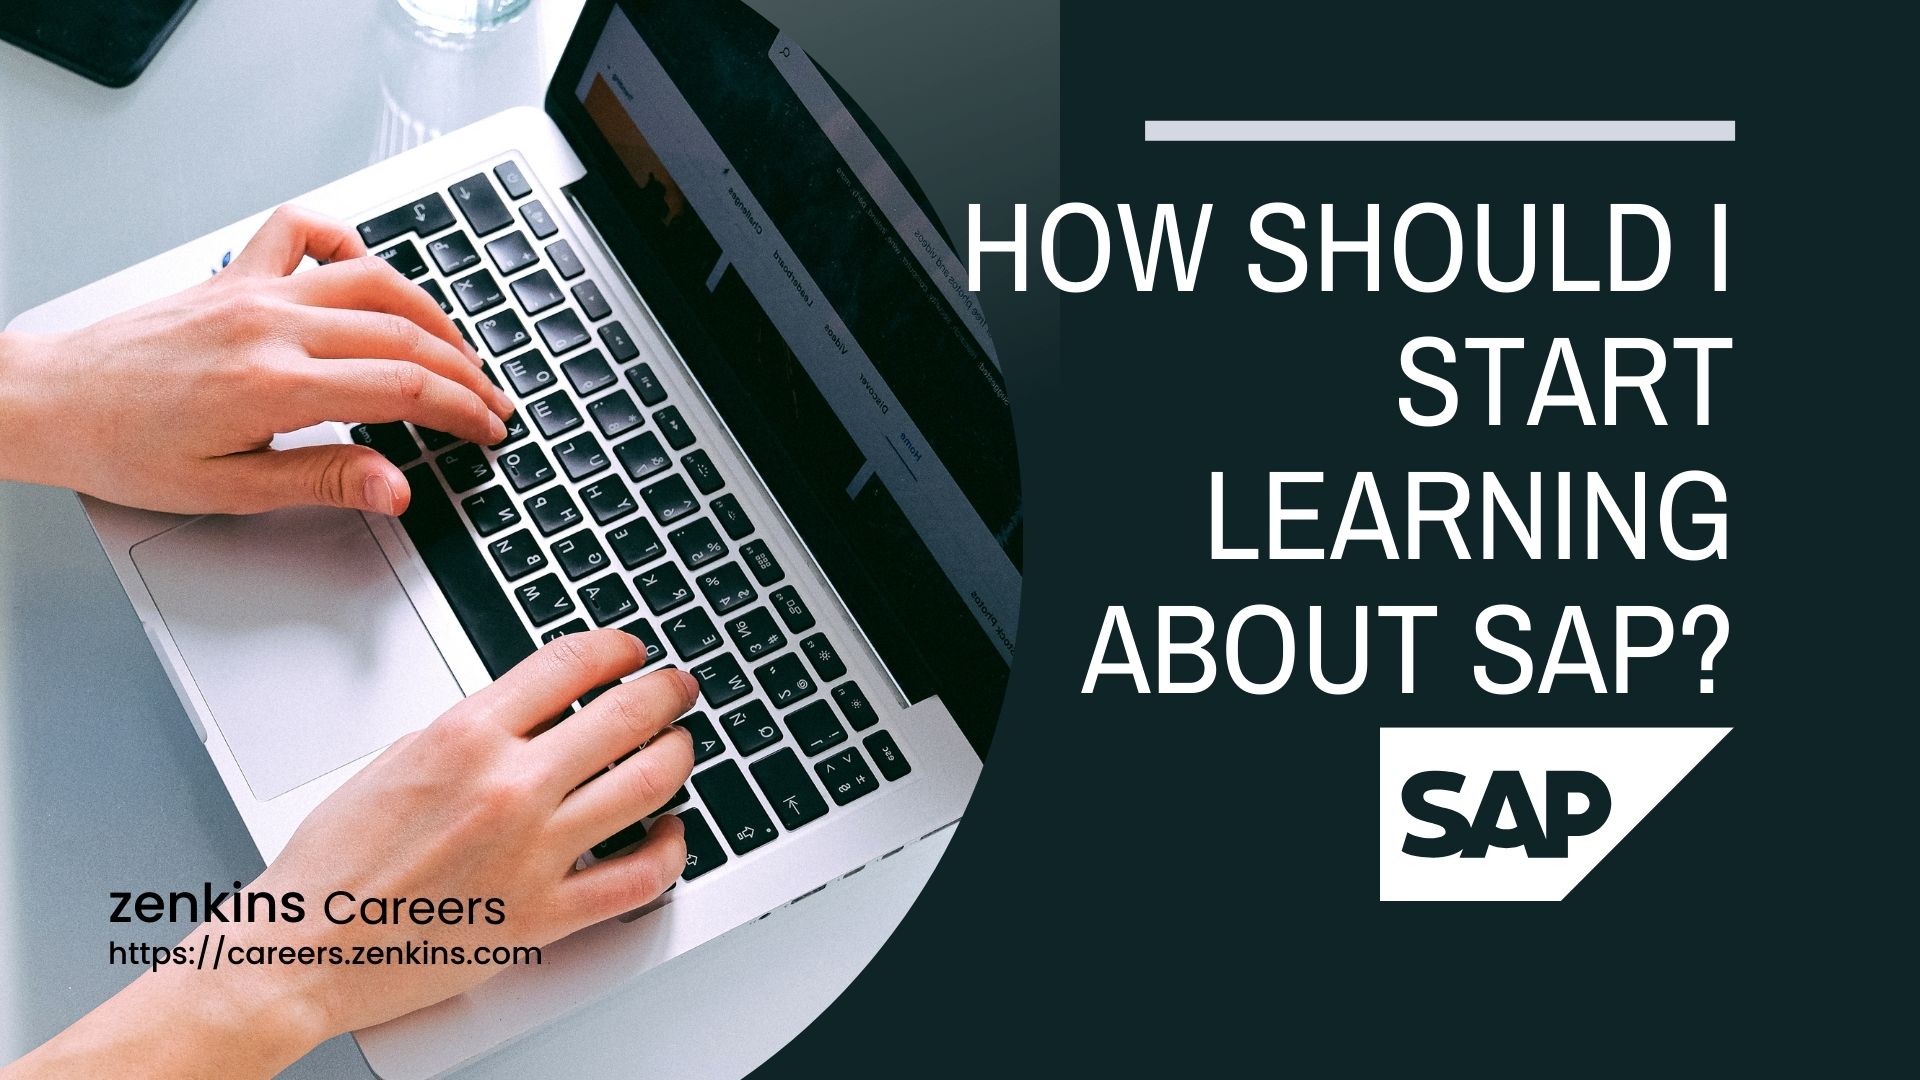 How should I start learning about SAP